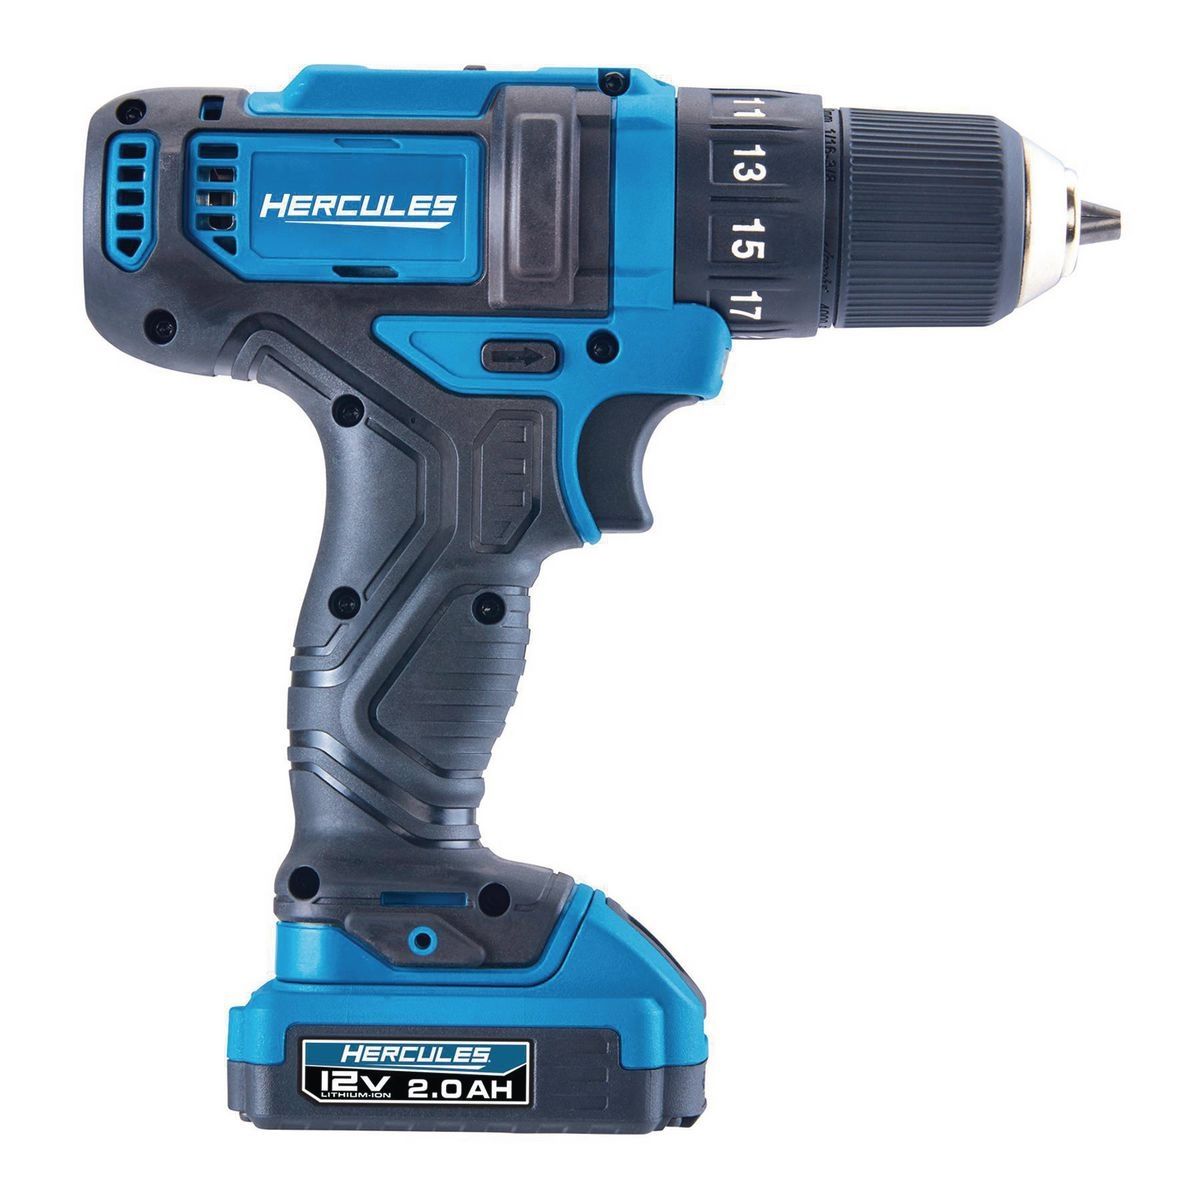 Hercules 12V Cordless 3/8 in. Compact Drill/Driver - Tool Only